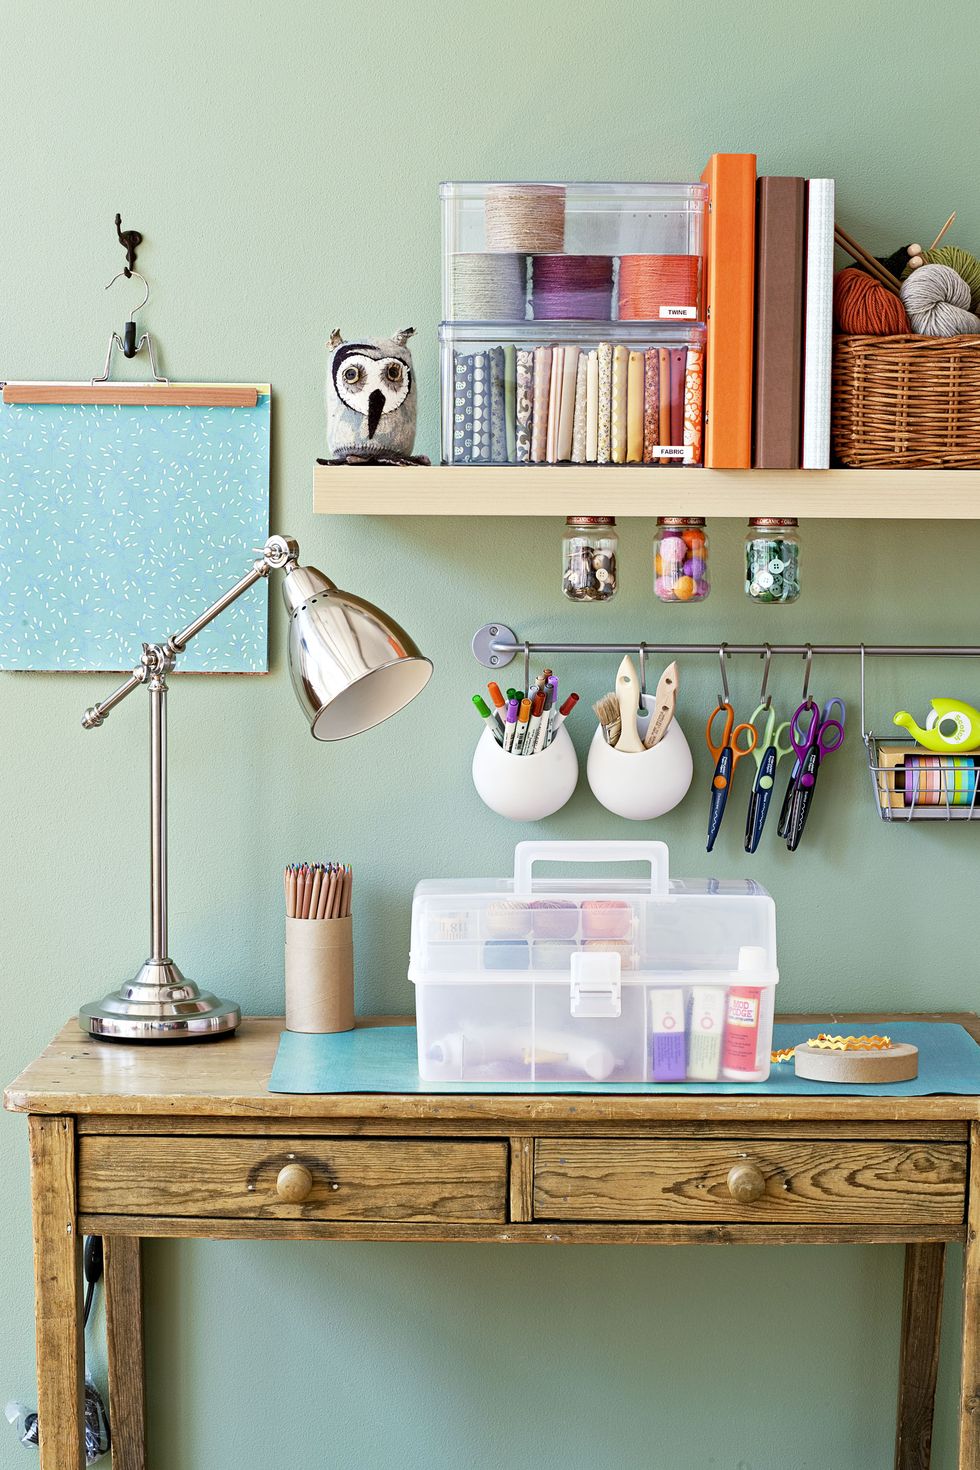 DIY home office organization ideas to create a comfortable workspace